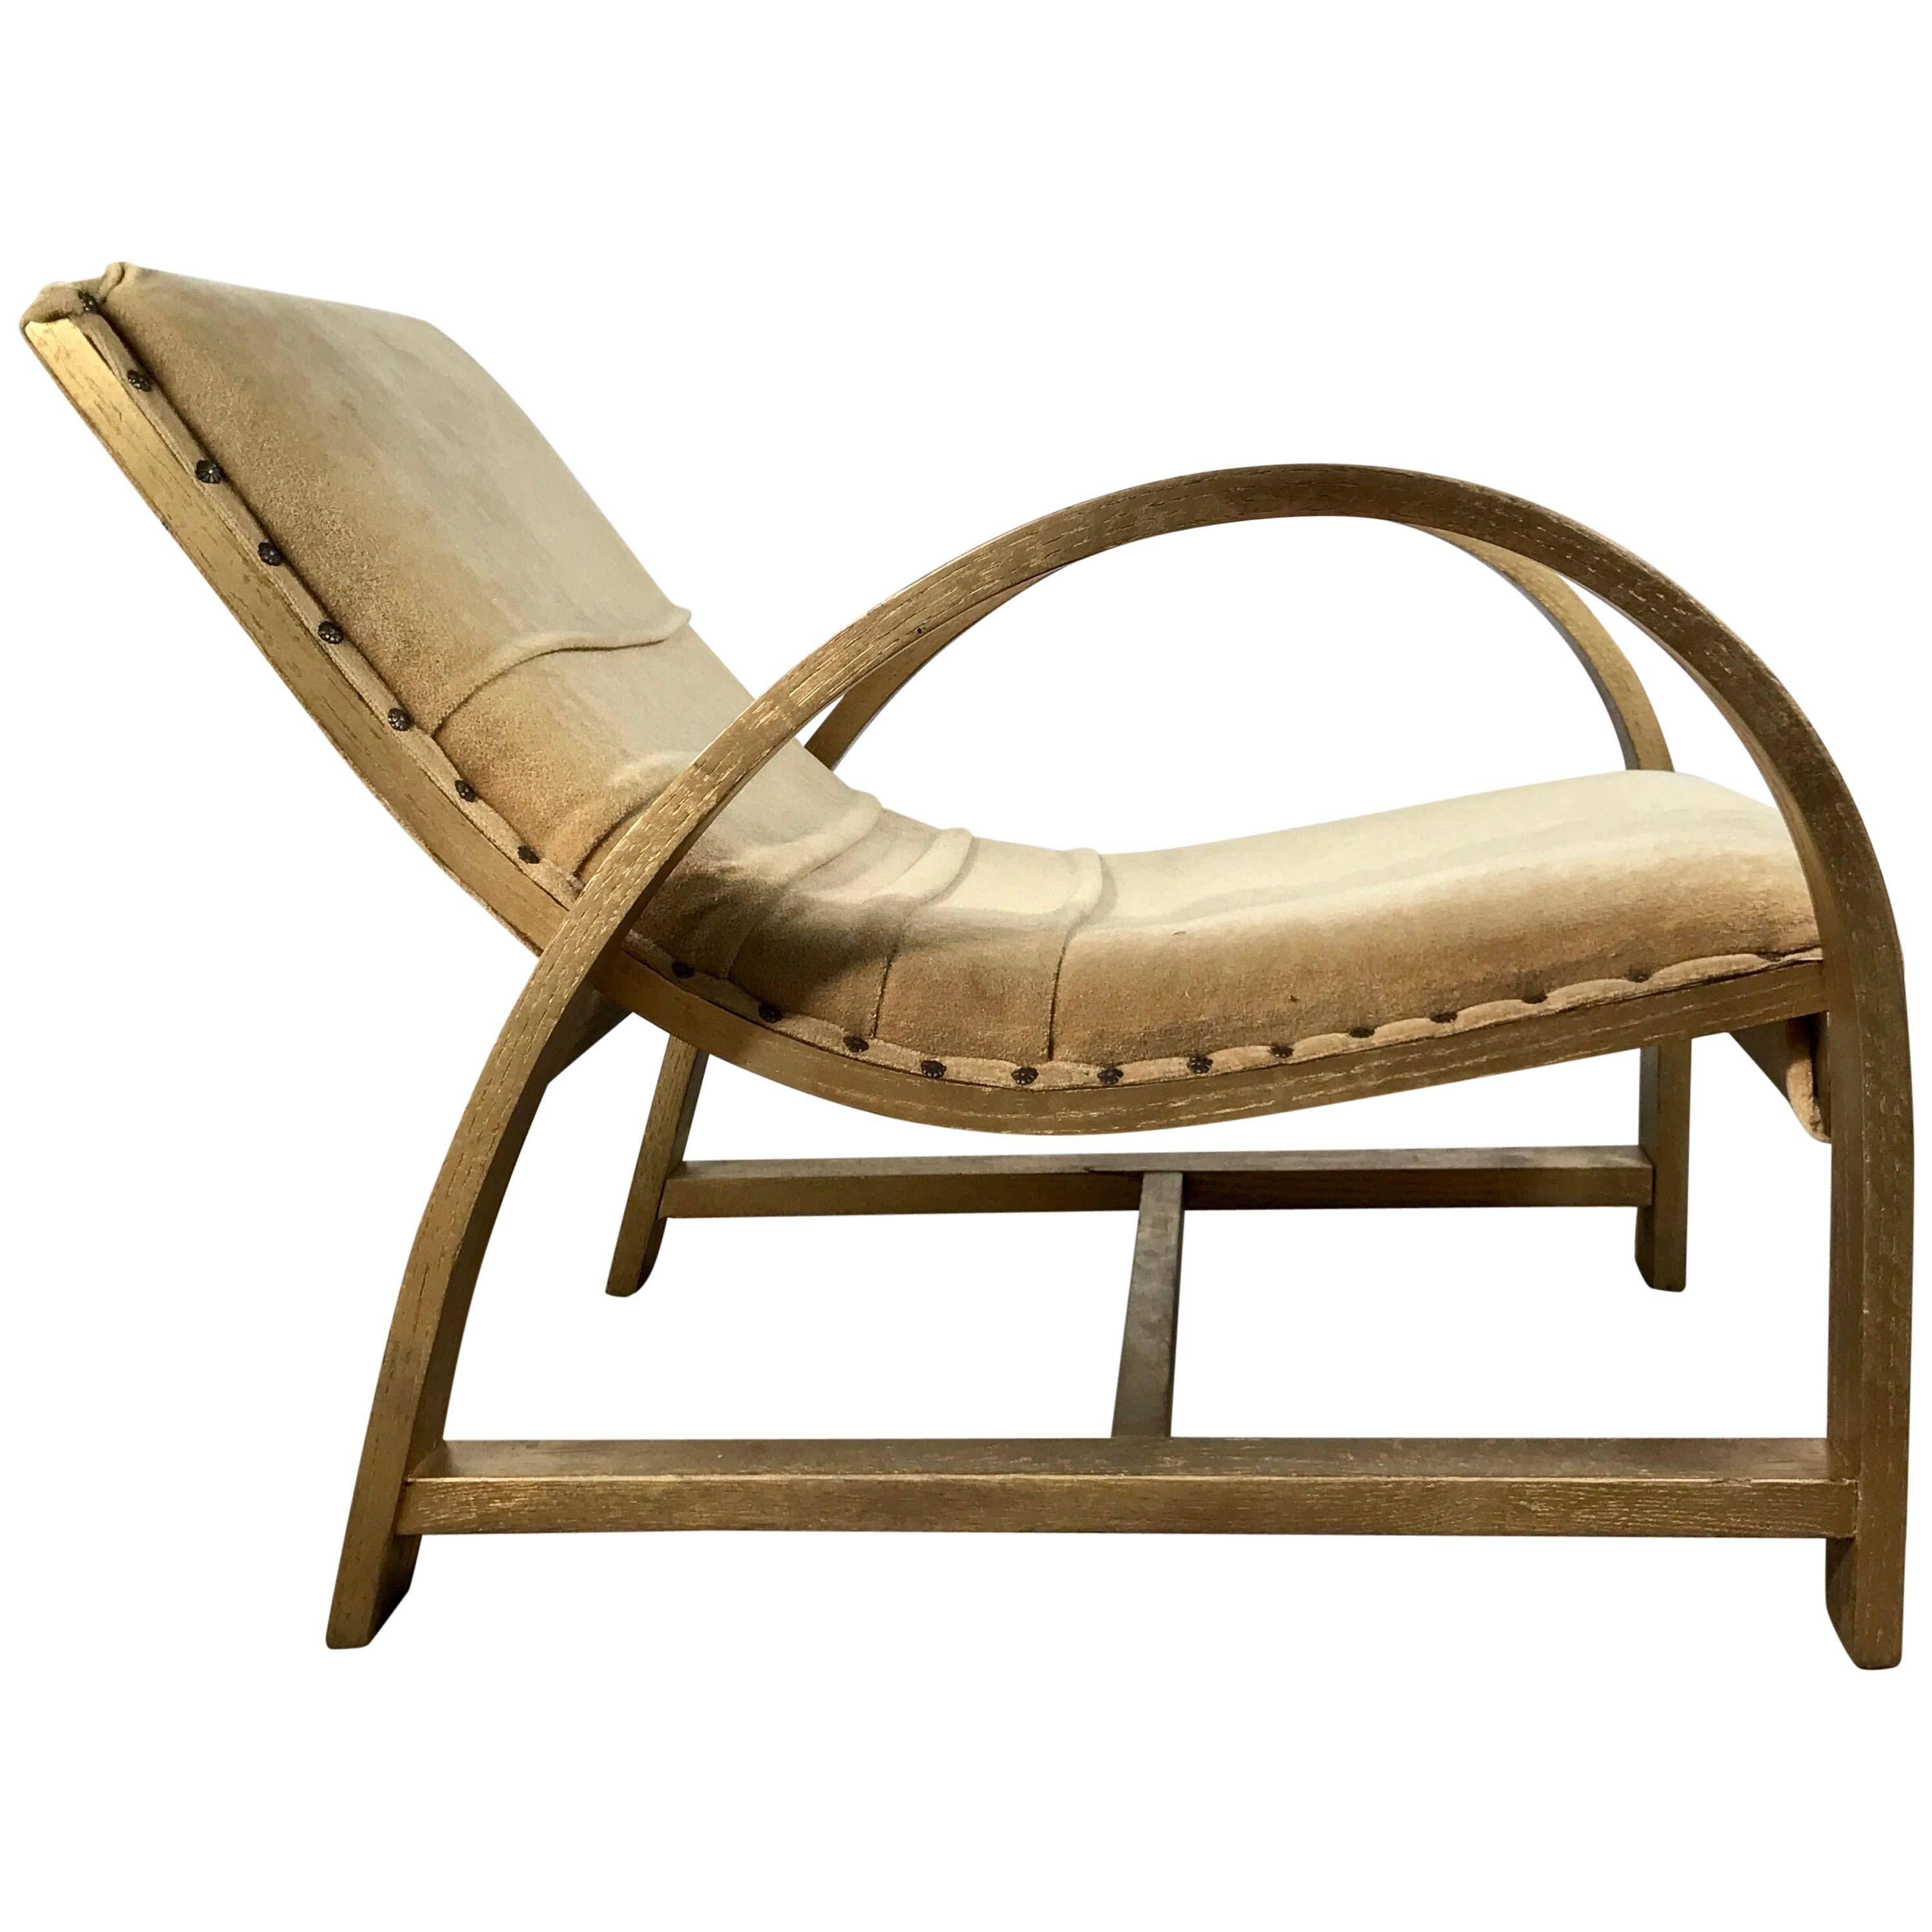 Art Deco Streamline Lounge Chair Designed by Gilbert Rohde for Heywood Wakefield